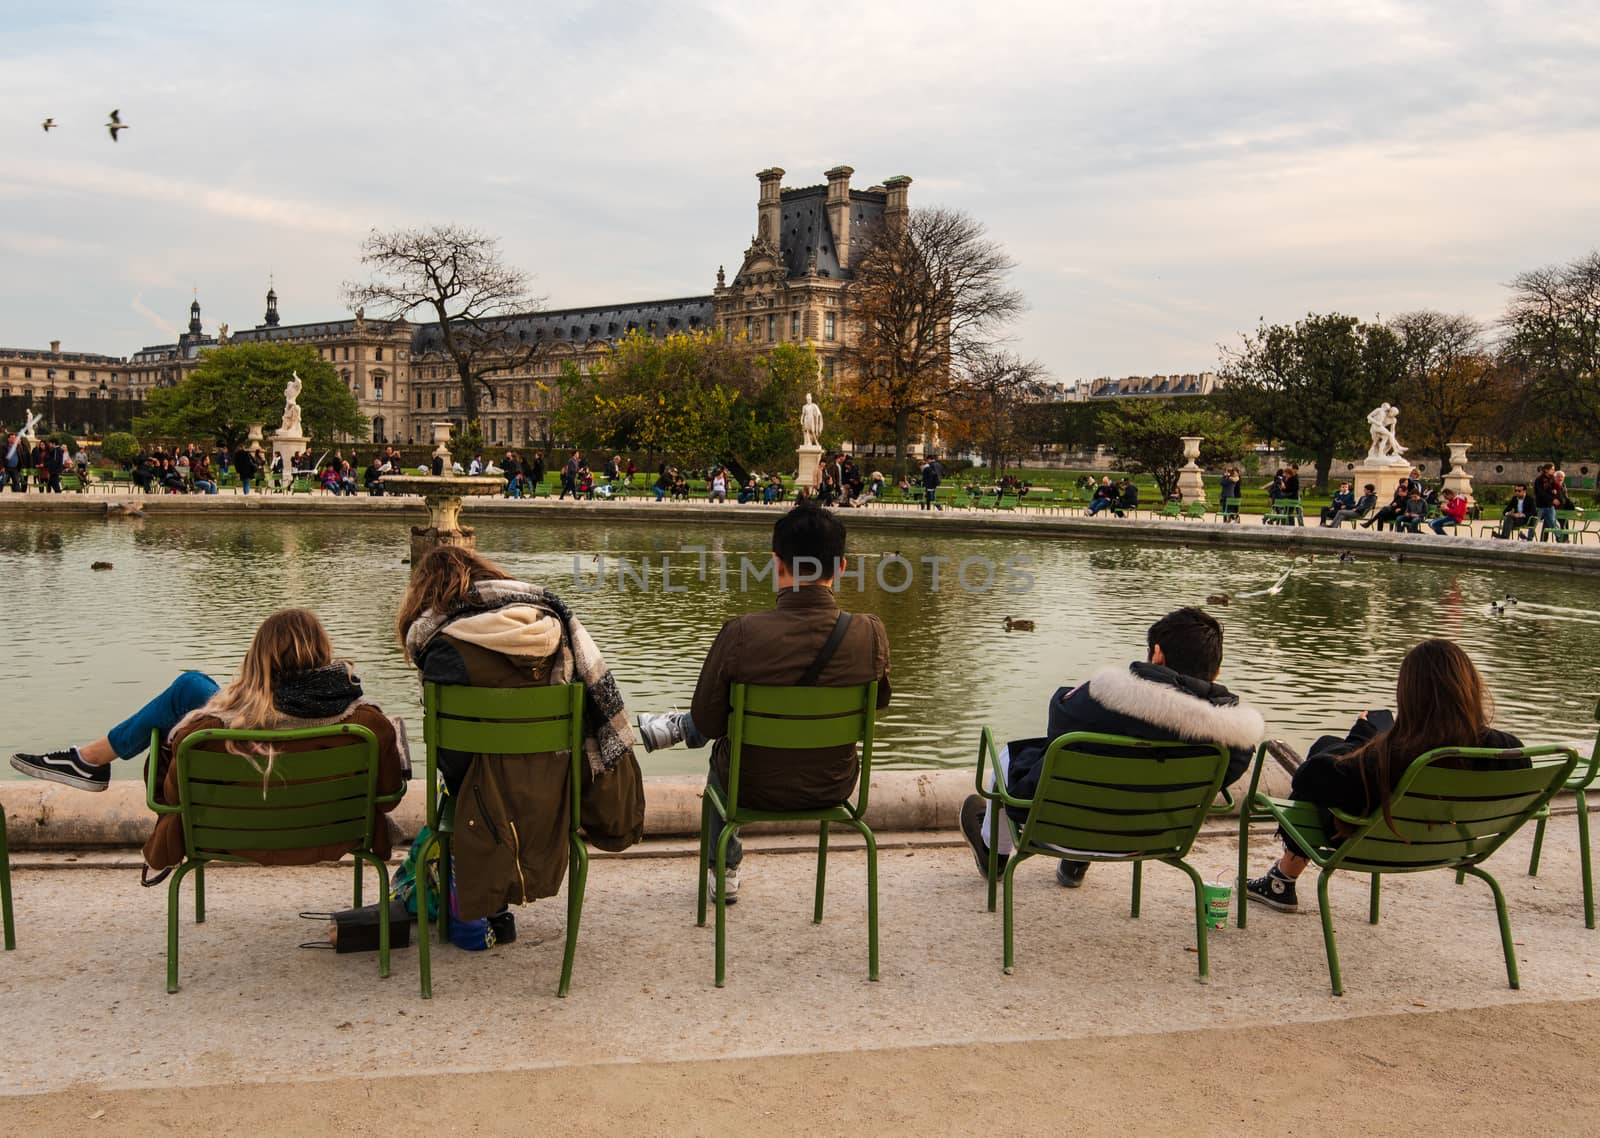 Paris, France -- November 3, 2017 -- Visitors to the Tuileries relax on green chairs by a pond.